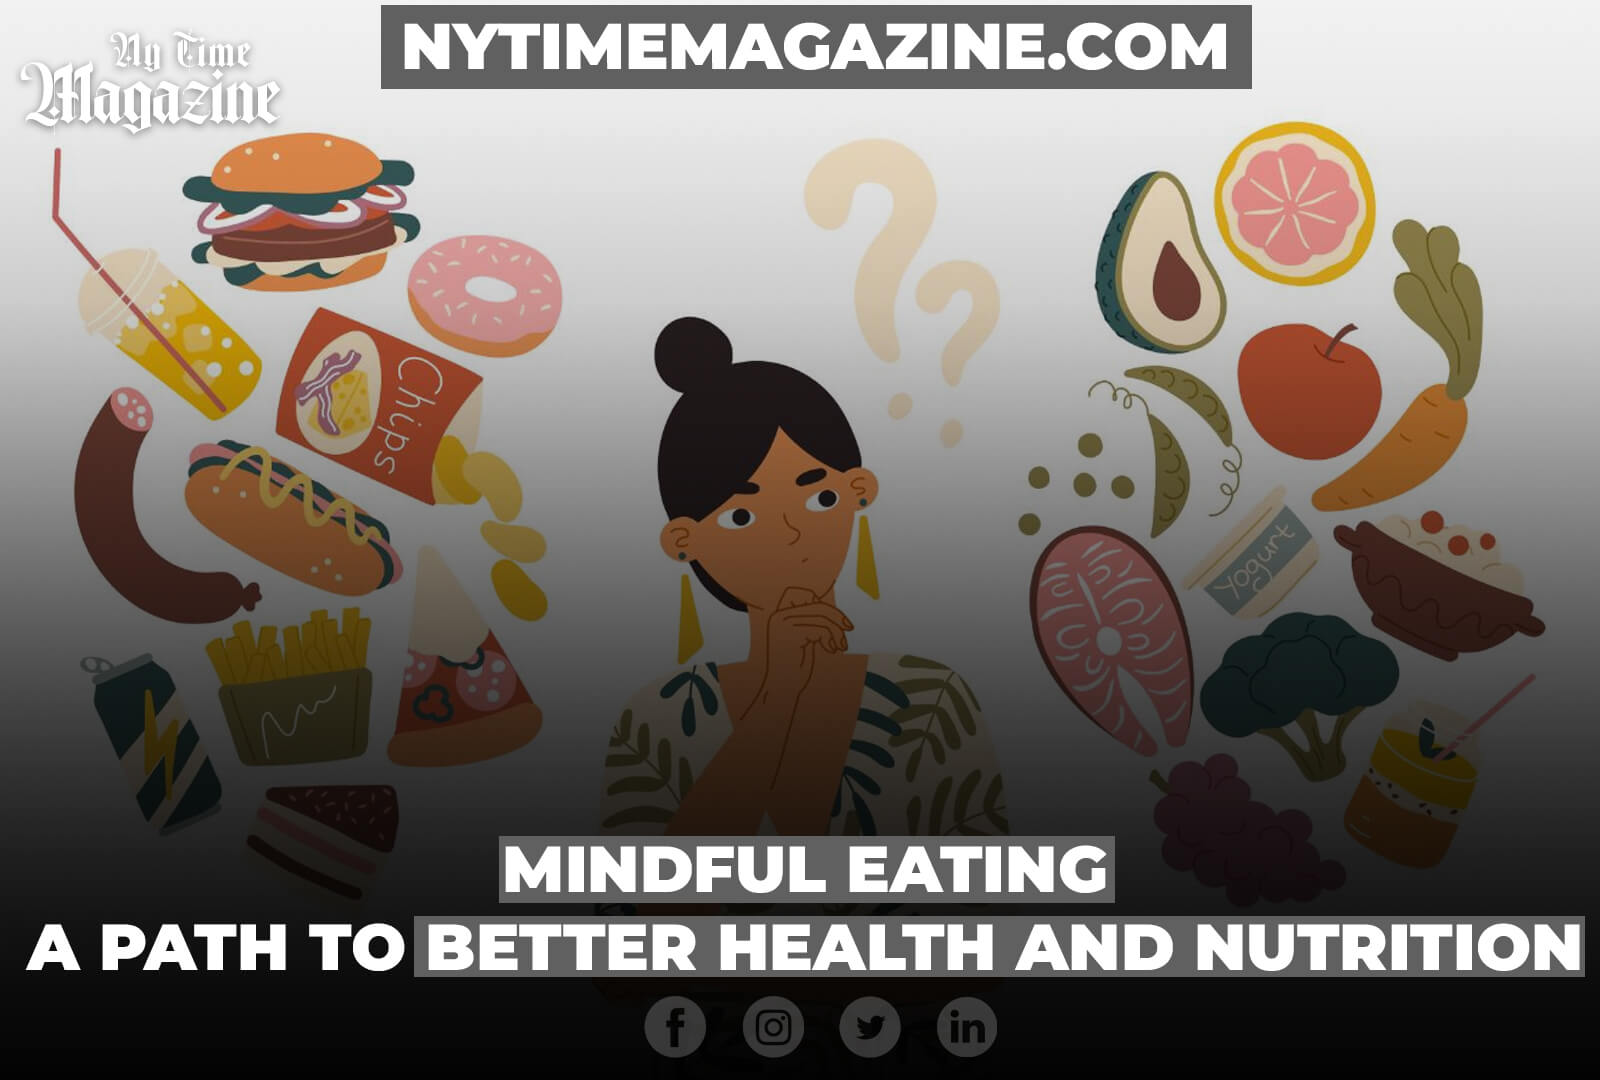 Mindful Eating: A Path to Better Health and Nutrition